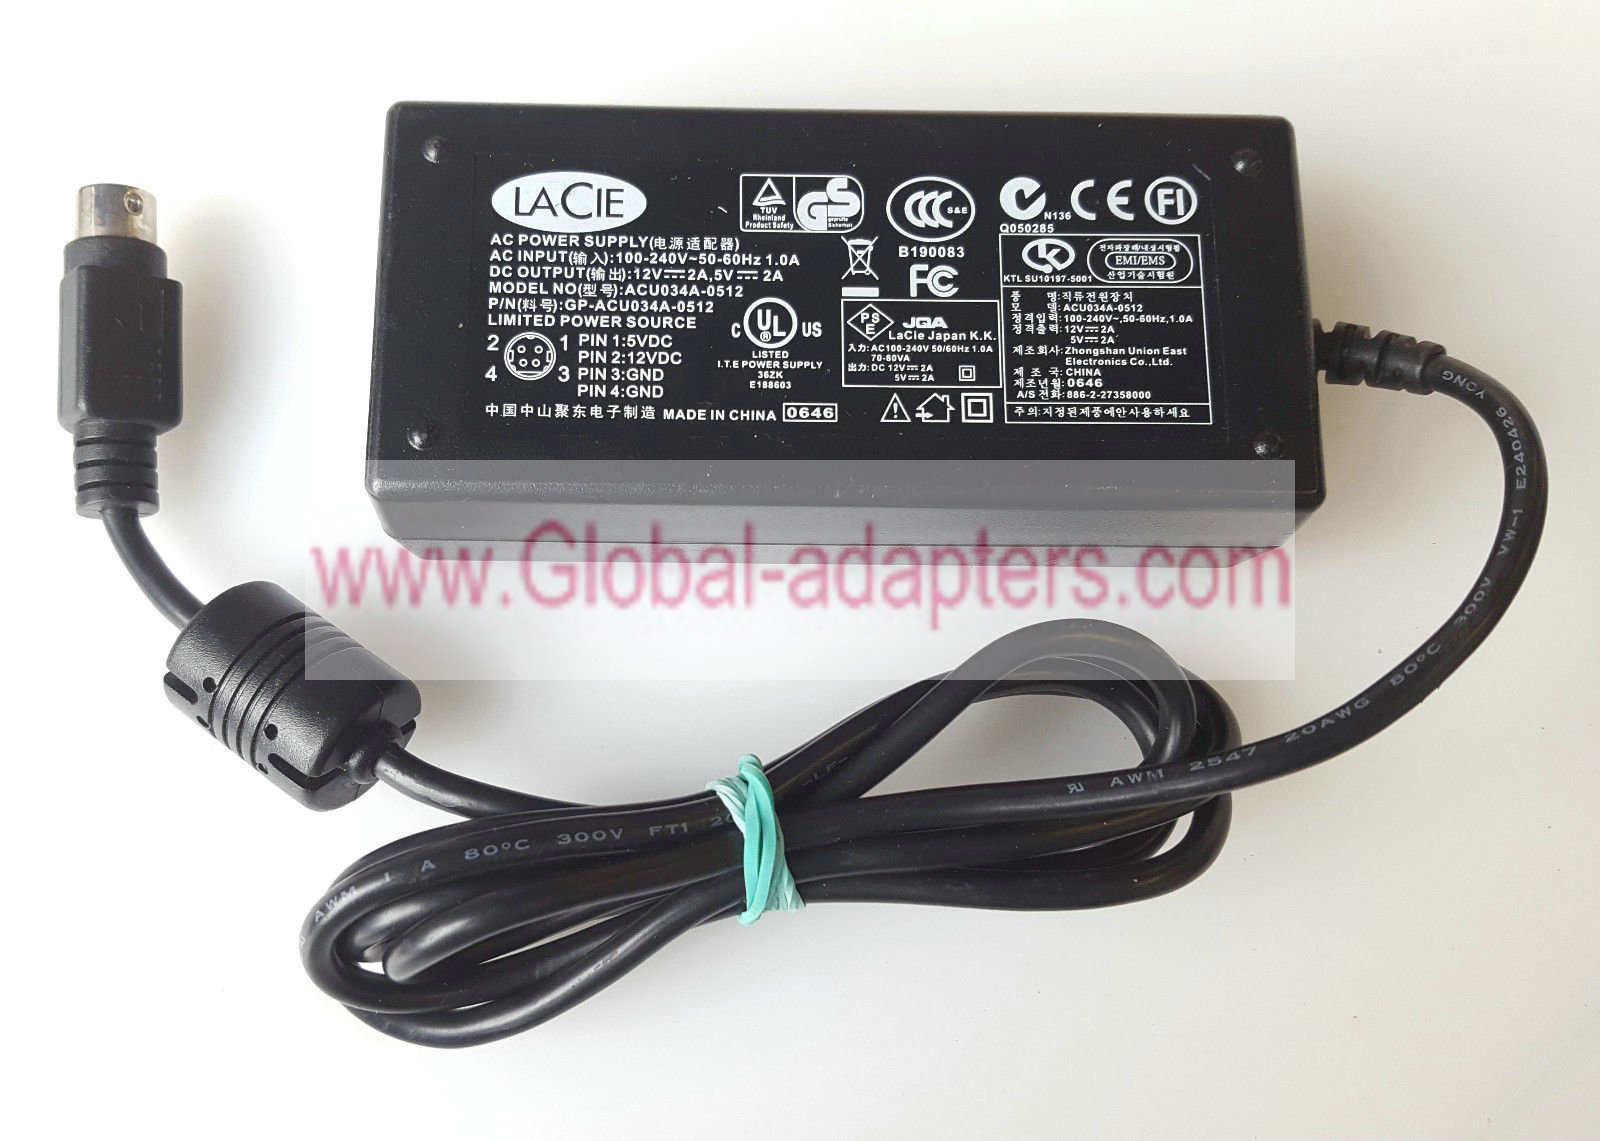 New AC ADAPTER 12V/5V 2A LACIE ACU034A-0512 POWER SUPPLY 710449A FOR MANY LACIE DRIVE 4pin din